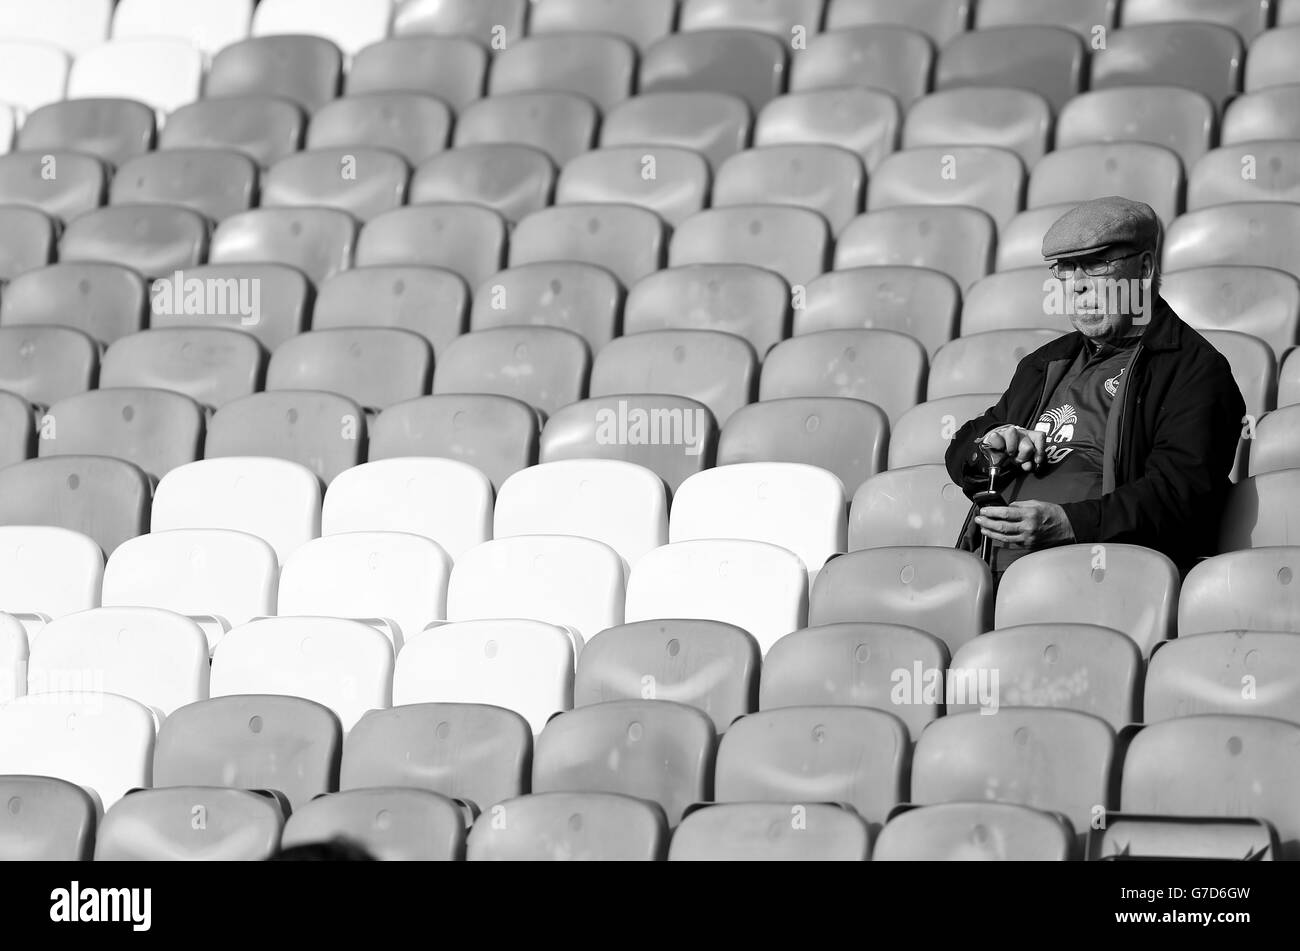 An Everton fan in the stands during the Barclays Premier League match at Goodison Park, Liverpool. PRESS ASSOCIATION Photo. Picture date: Saturday October 18, 2014. See PA story SOCCER Everton. Photo credit should read Peter Byrne/PA Wire. . . Stock Photo